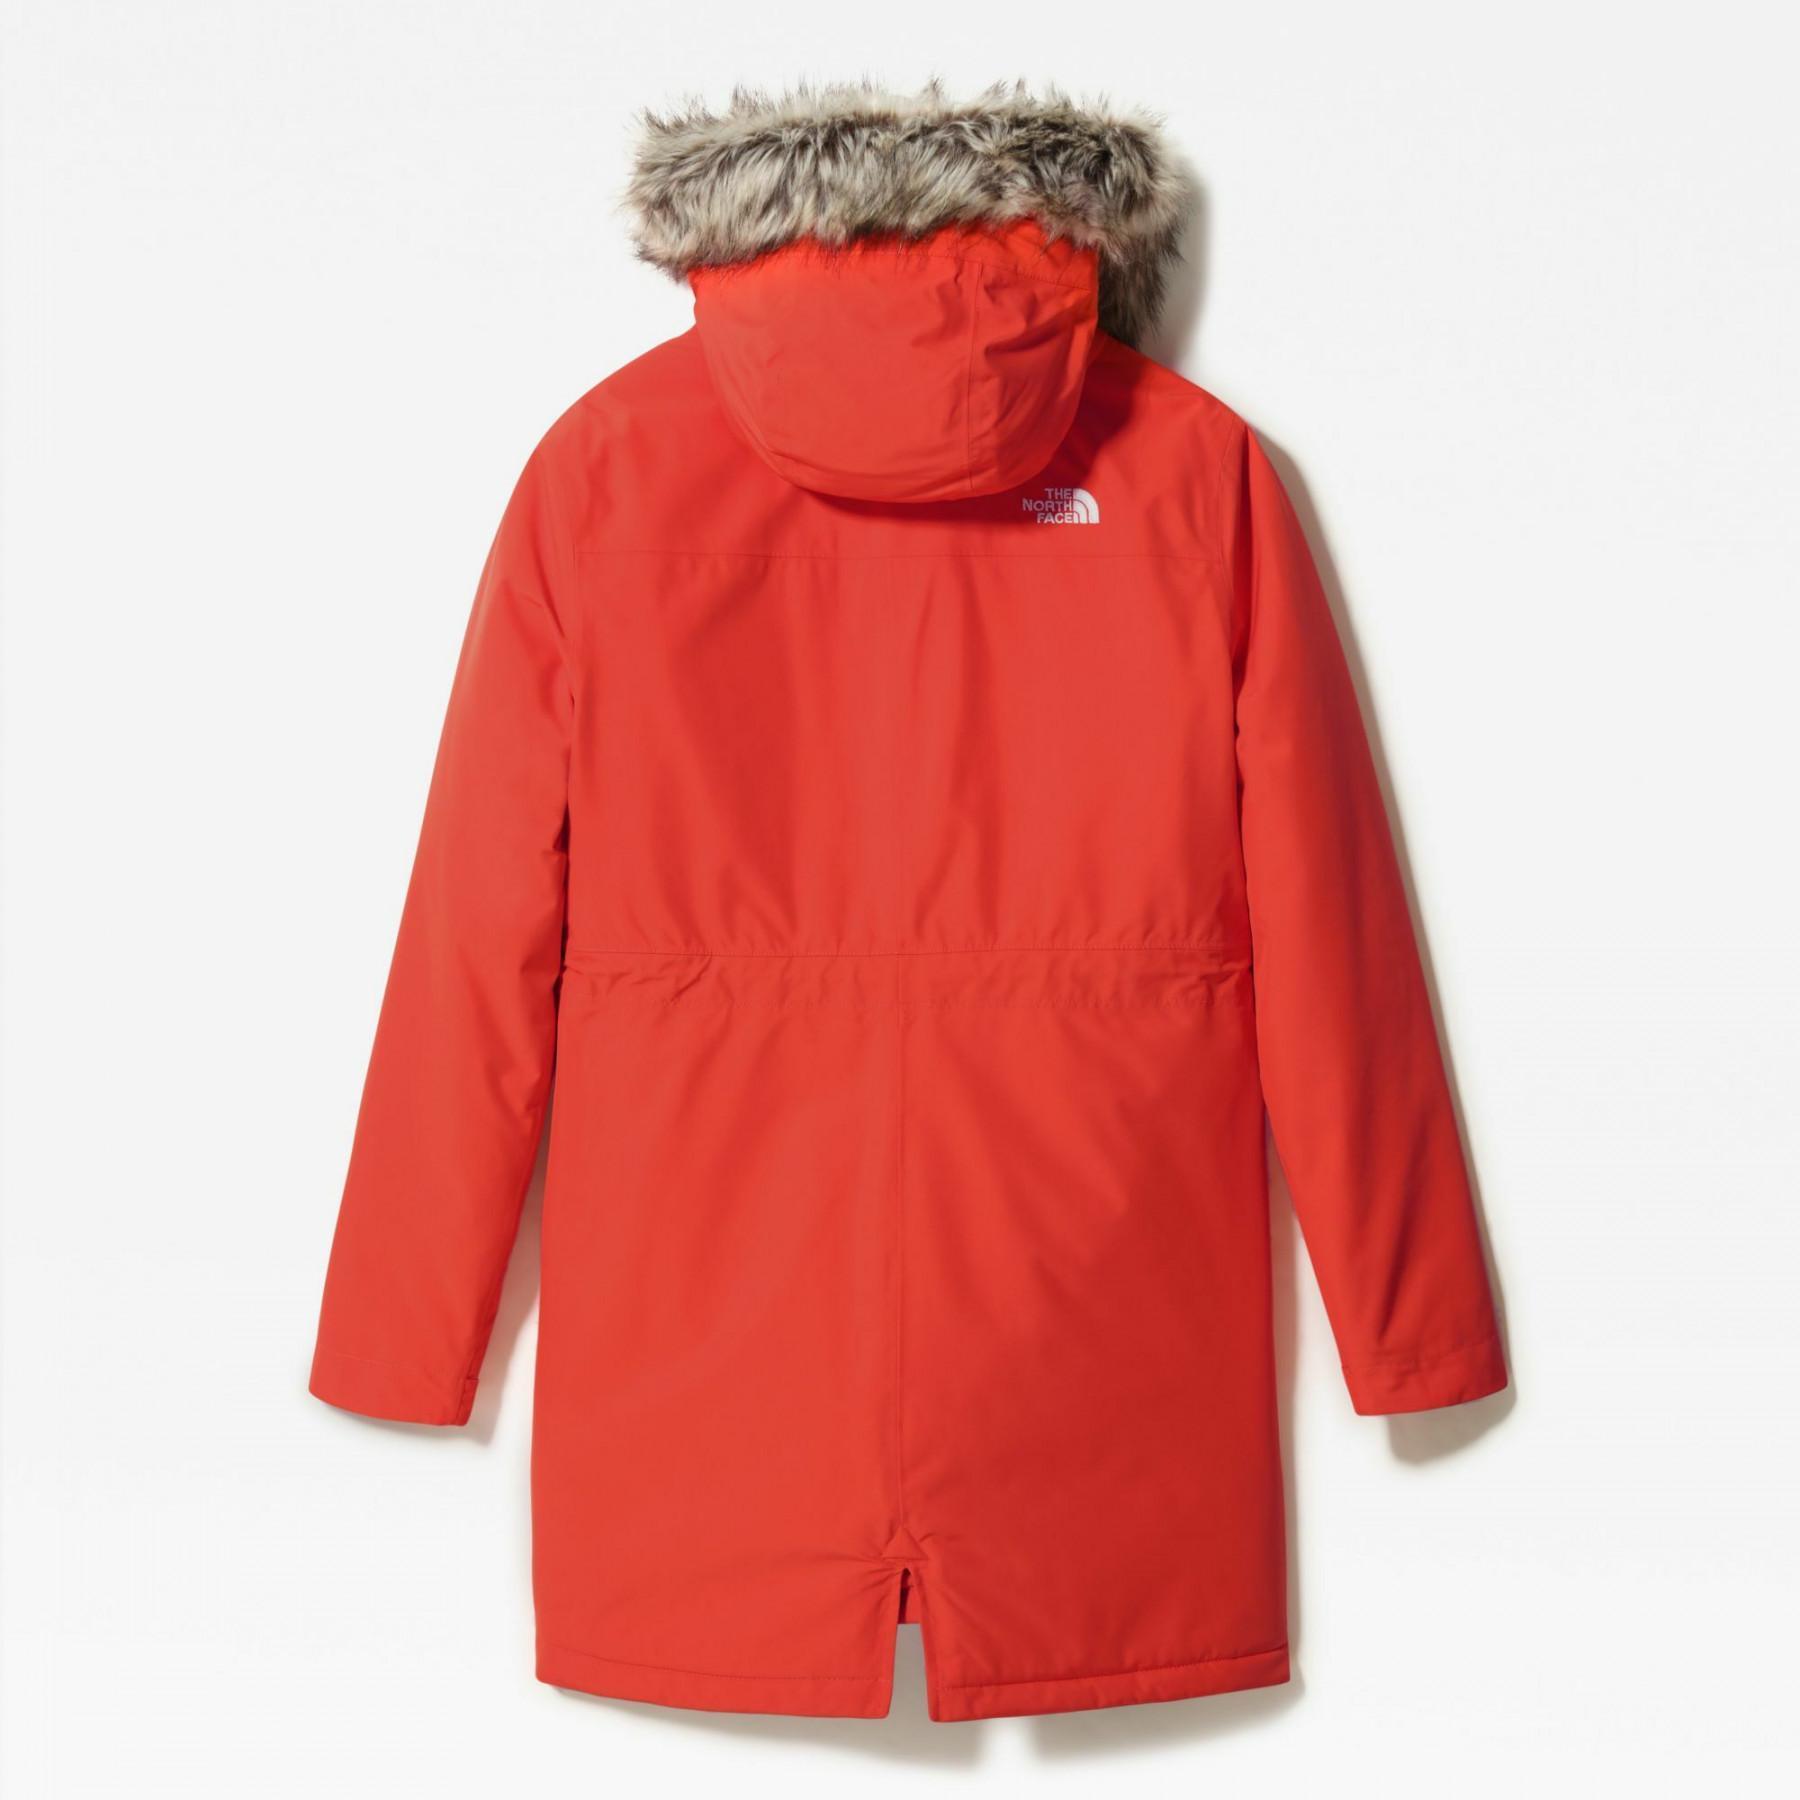 Parka voor dames The North Face Recycled Zaneck